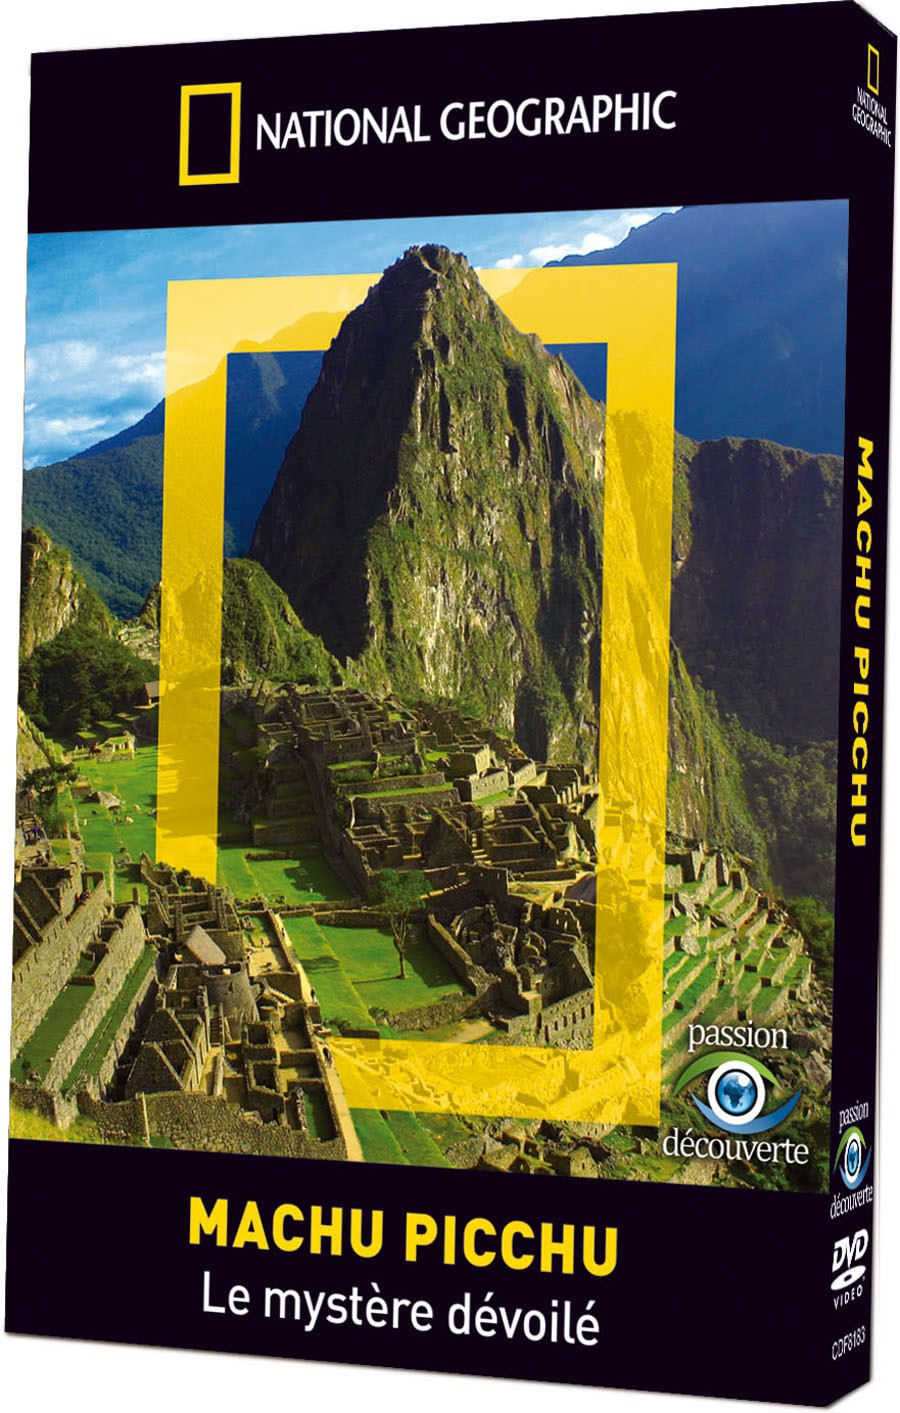 NATIONAL GEOGRAPHIC - MACHU PICCHU, LE MYSTERE DEVOILE